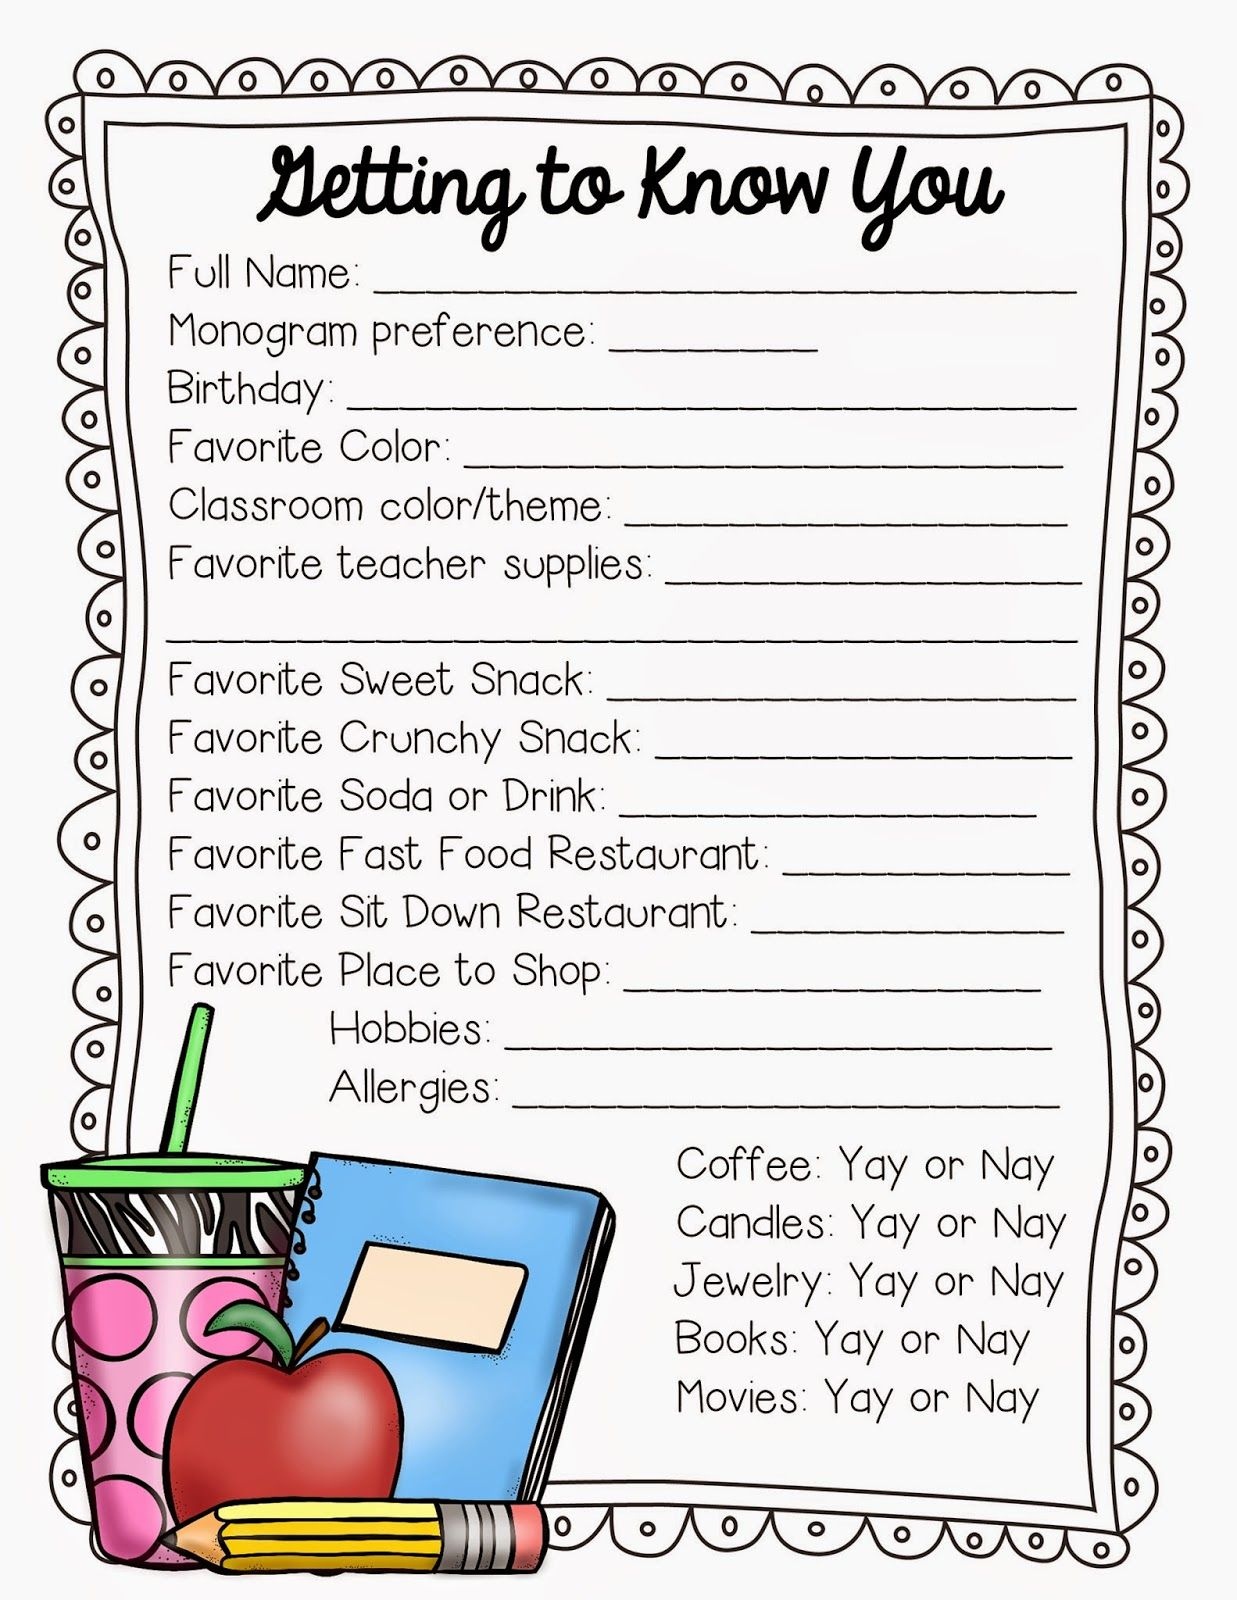 Free Gift Idea Survey For Child&amp;#039;s Teacher Or Your Co-Workers2Nd - Make A Printable Survey Free